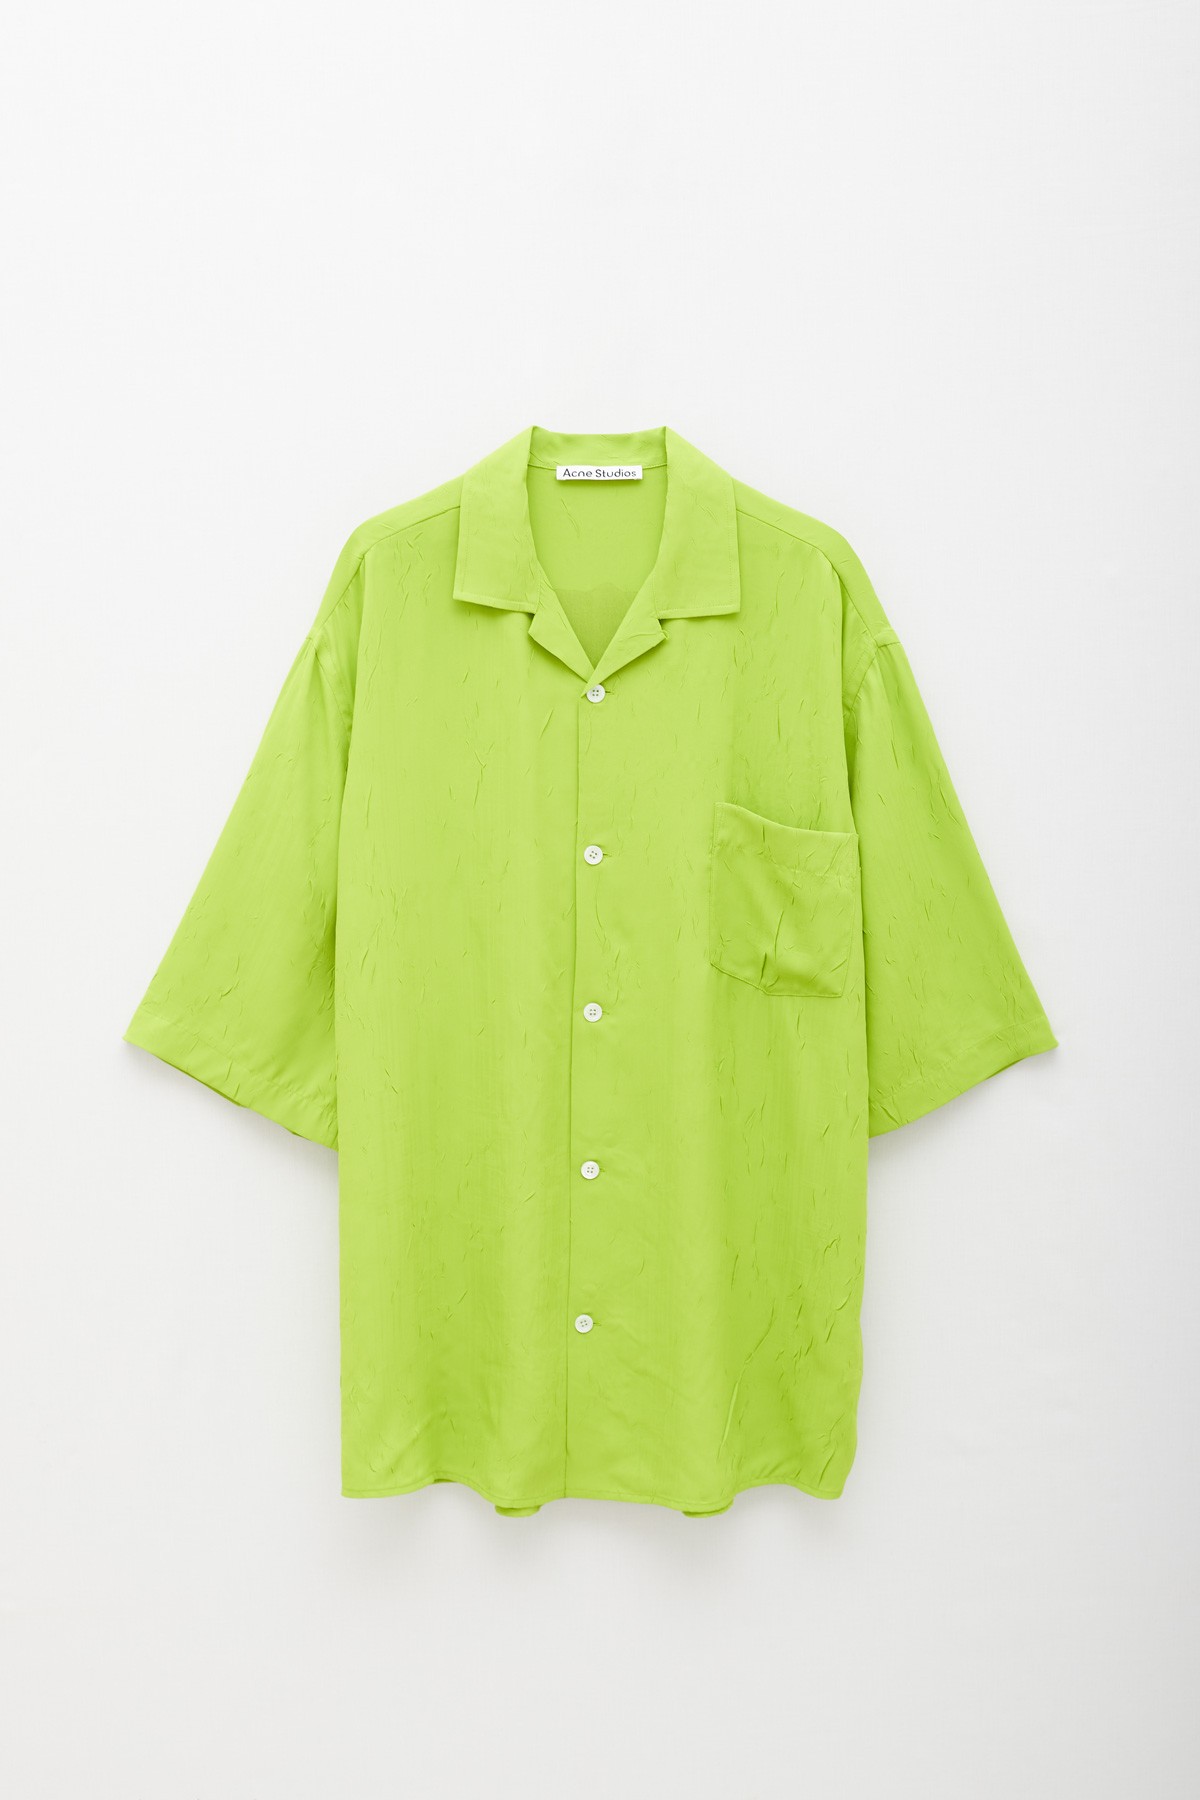 ACNE STUDIOS LIME GREEN BUTTON-UP PRINTED SS SHIRT IAMNUE